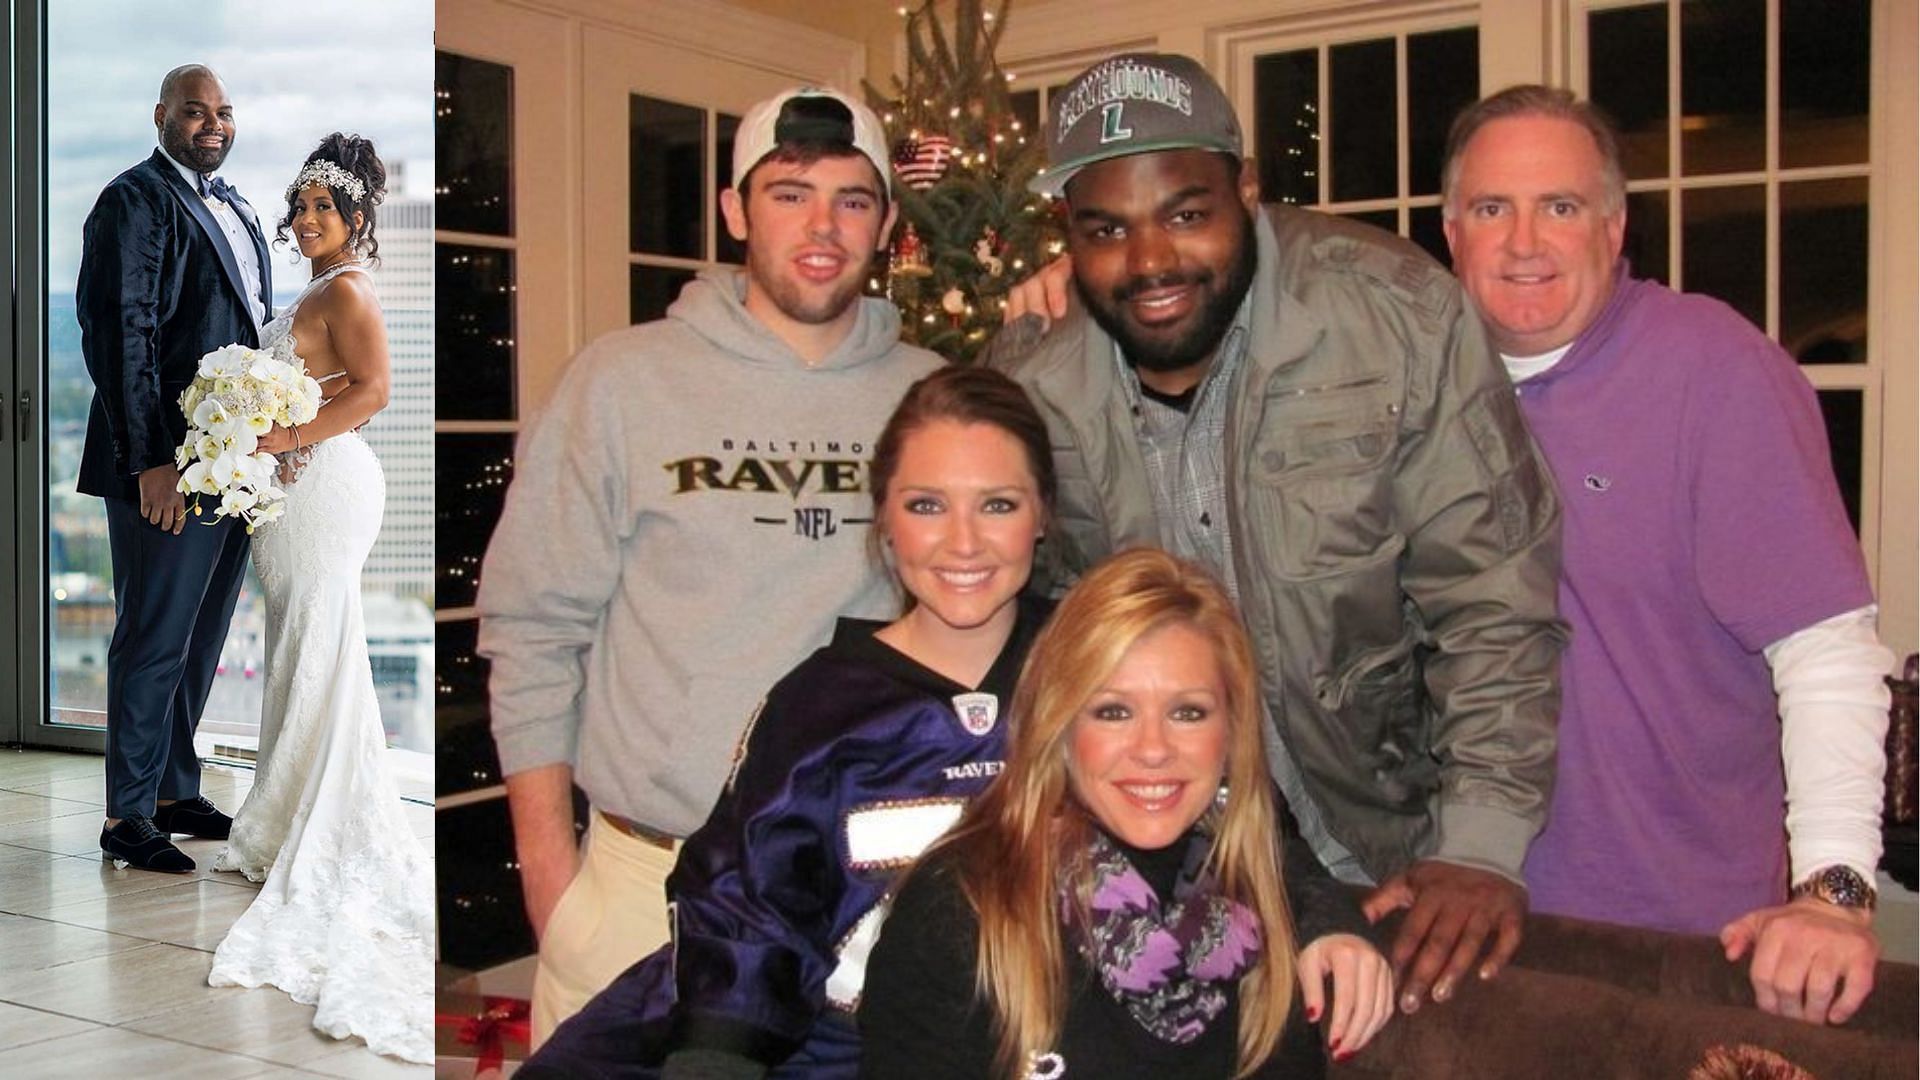 Michael Oher married girlfriend of 17 years (image via Instagram and Patrick Engal)